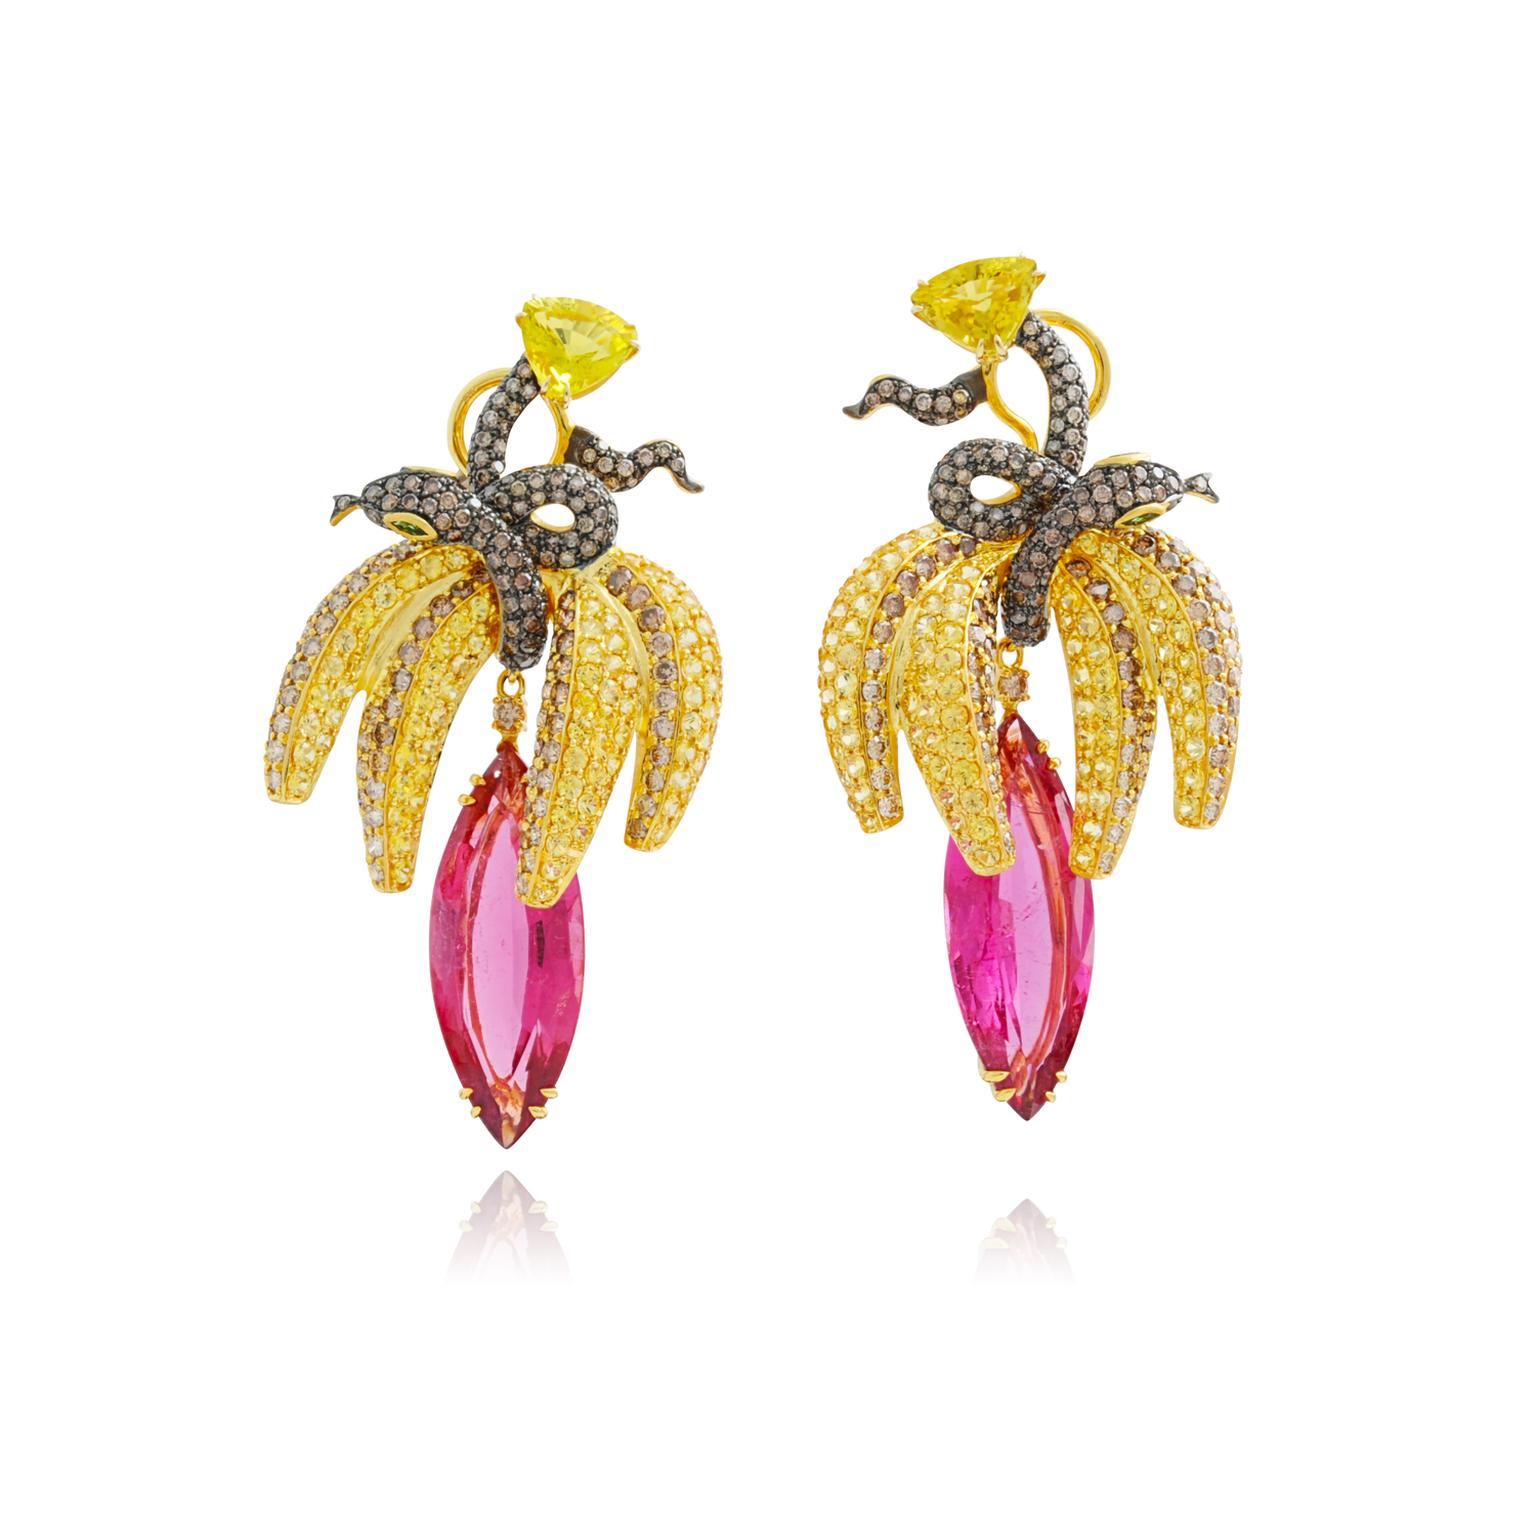 Lydia Courteille Fruits of my Passion pink tourmaline earrings